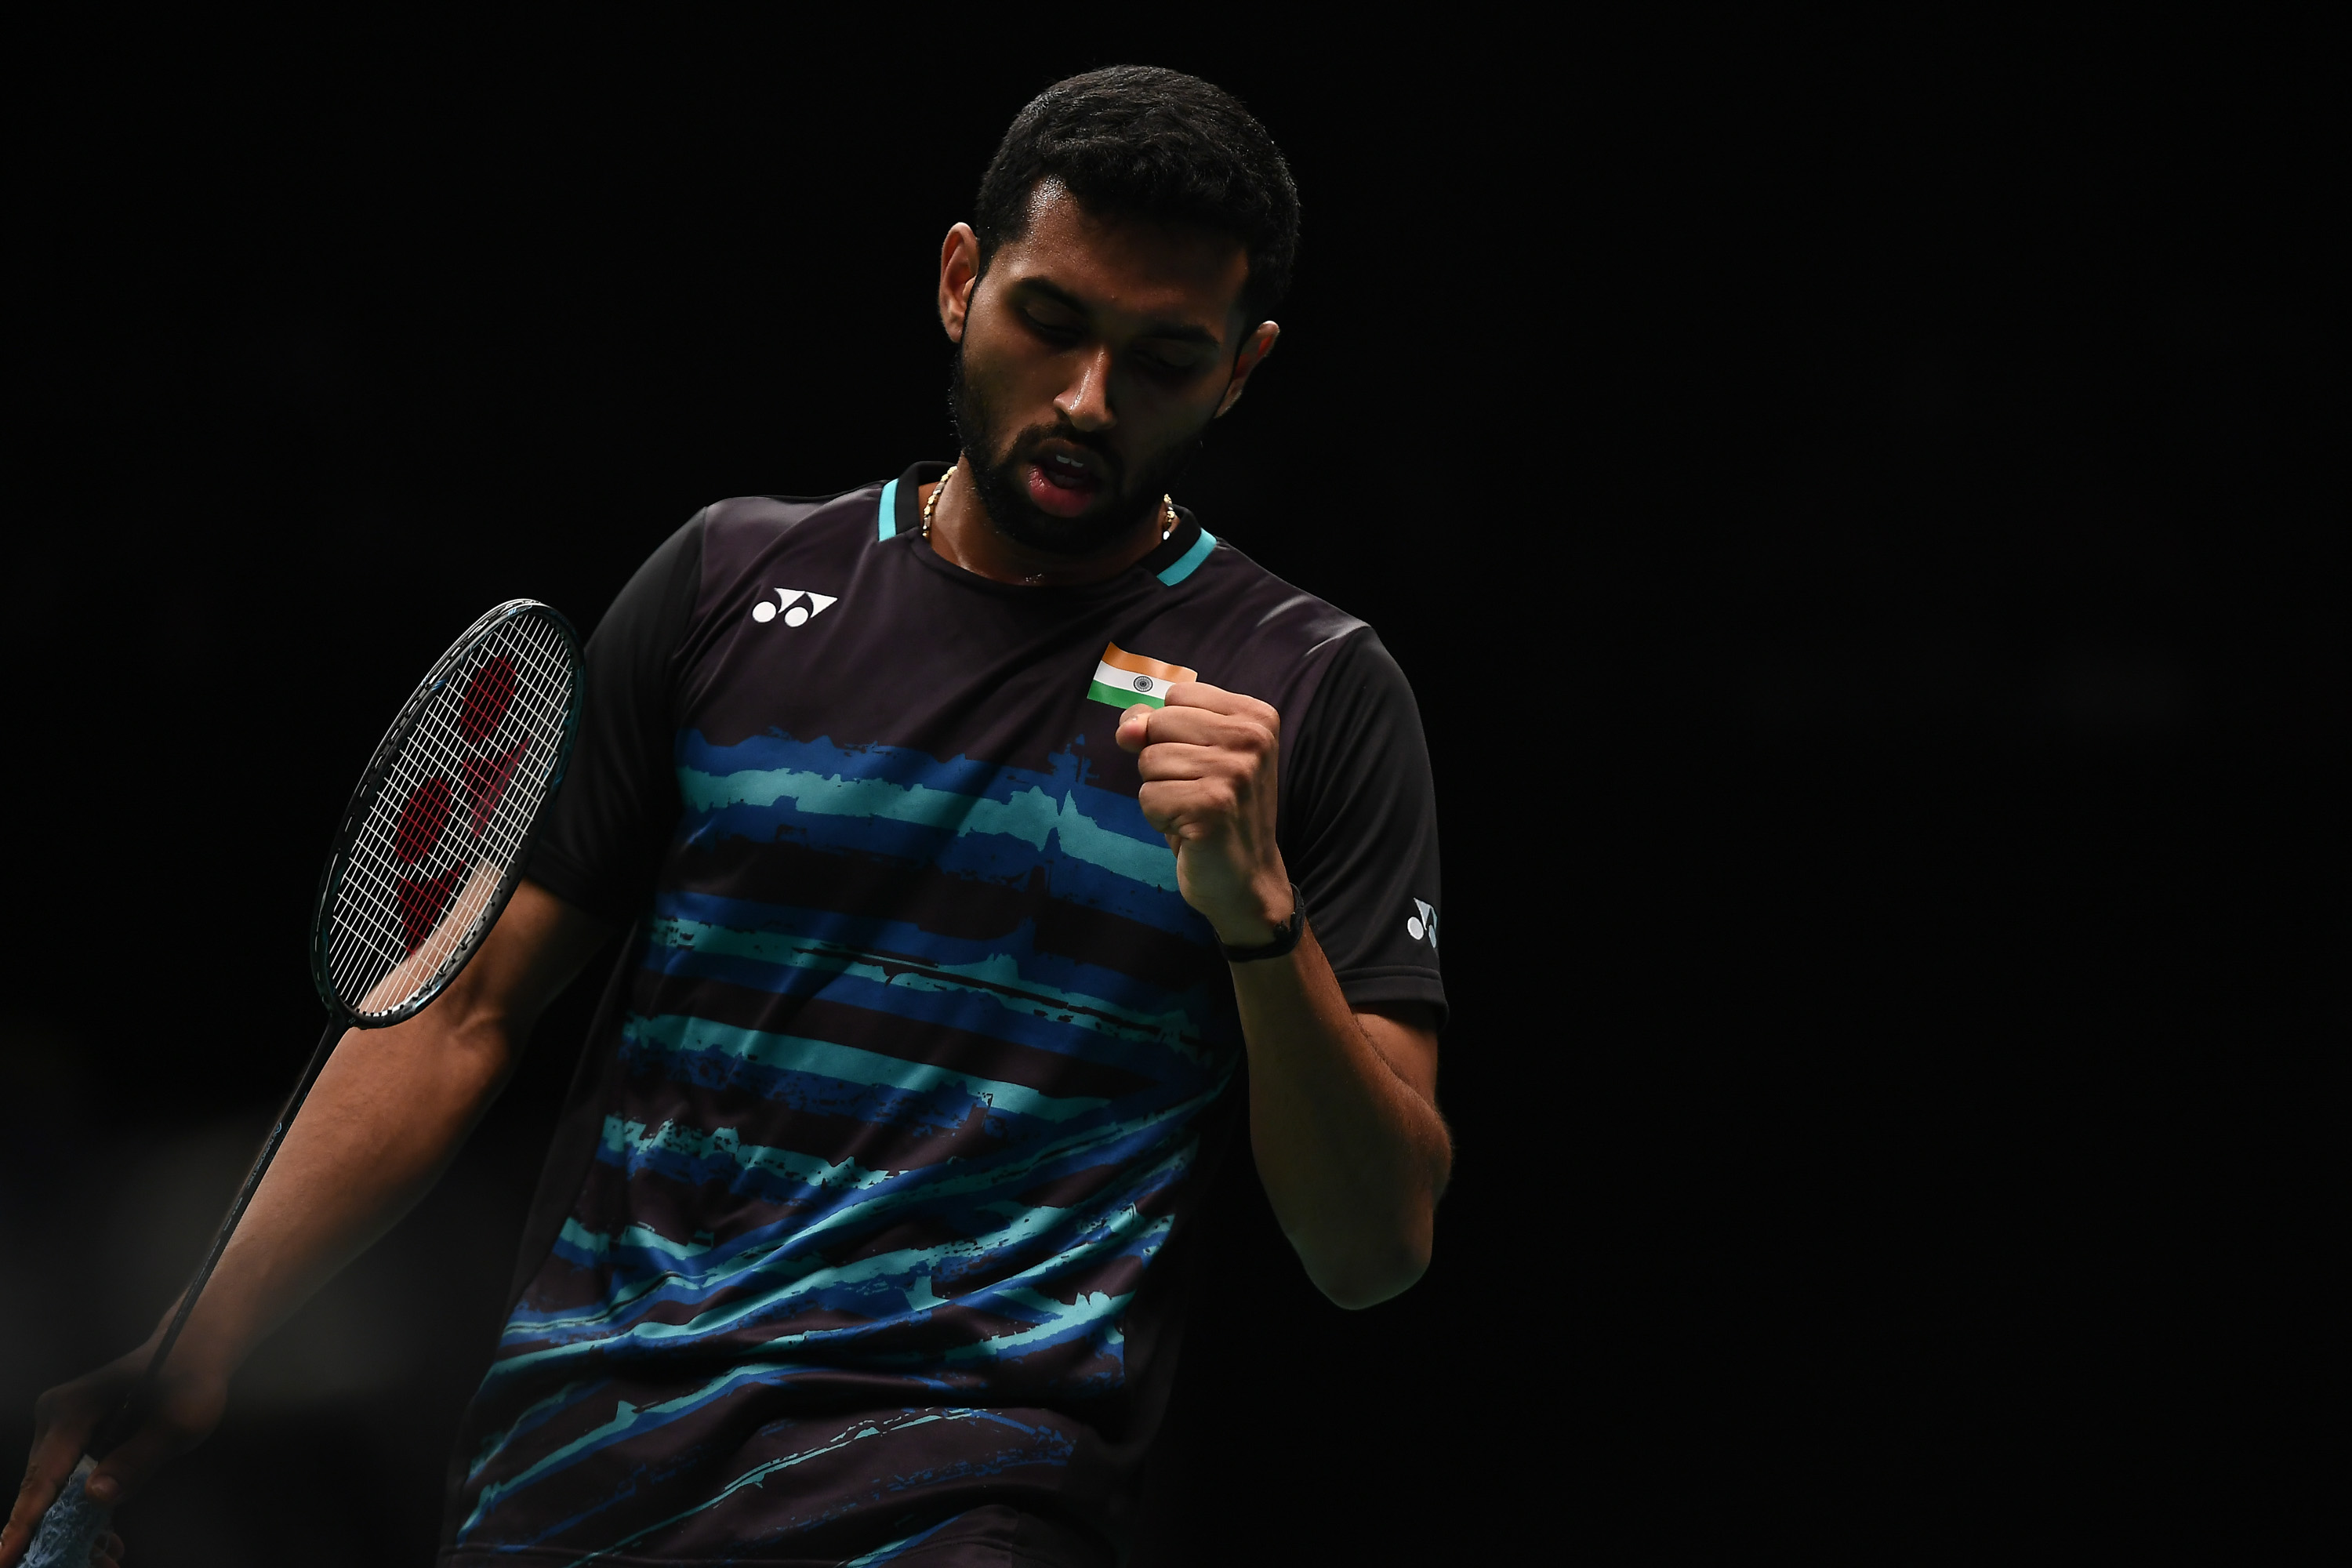 HS Prannoy intends to go all out and take calculated risks in Asian Games